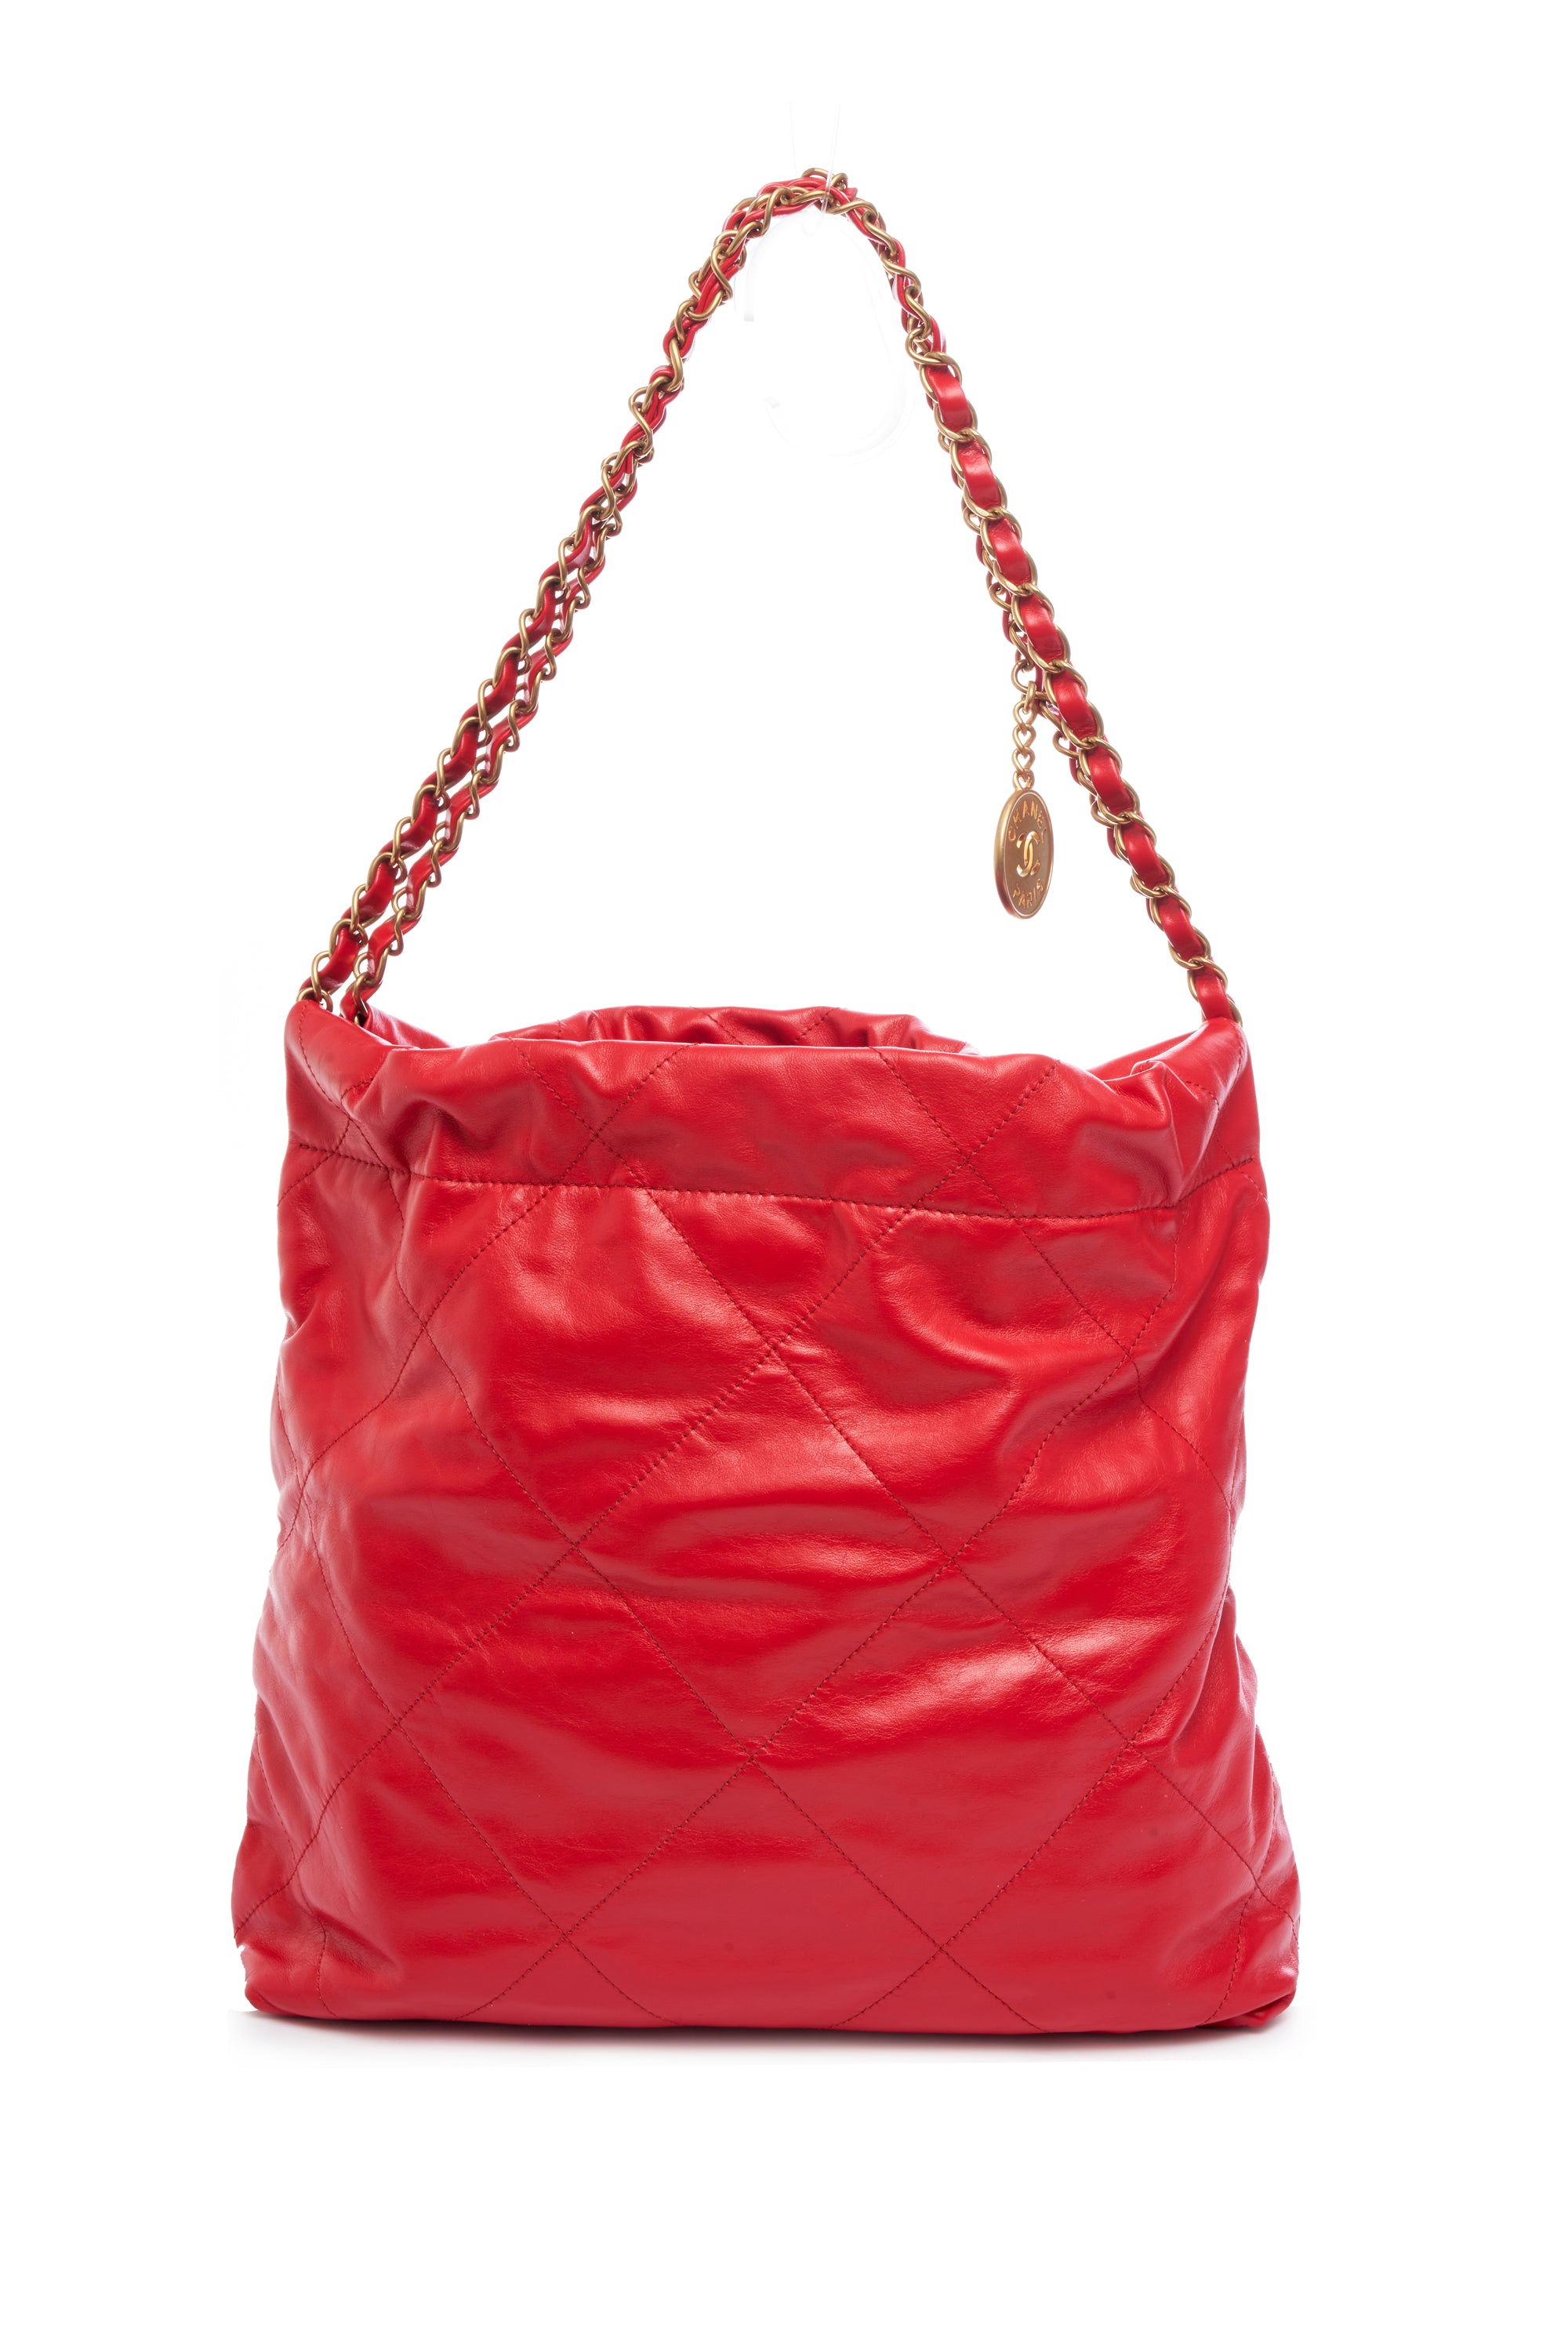 Chanel Candy Red 22 Bag